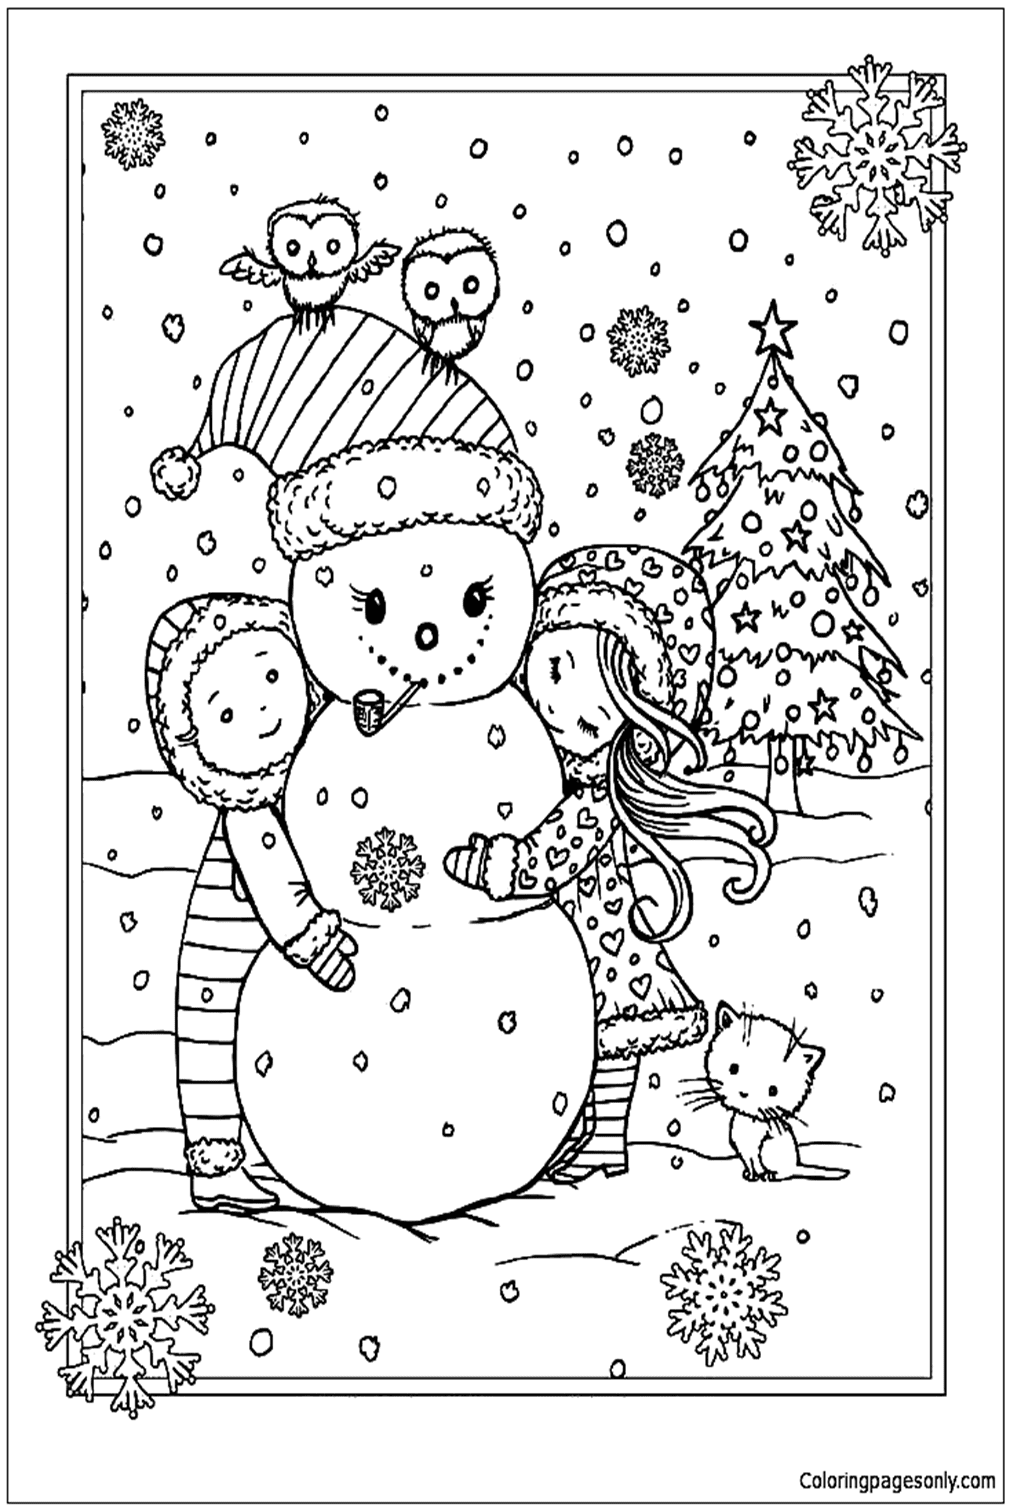 Children With Snowman During Christmas Coloring Pages